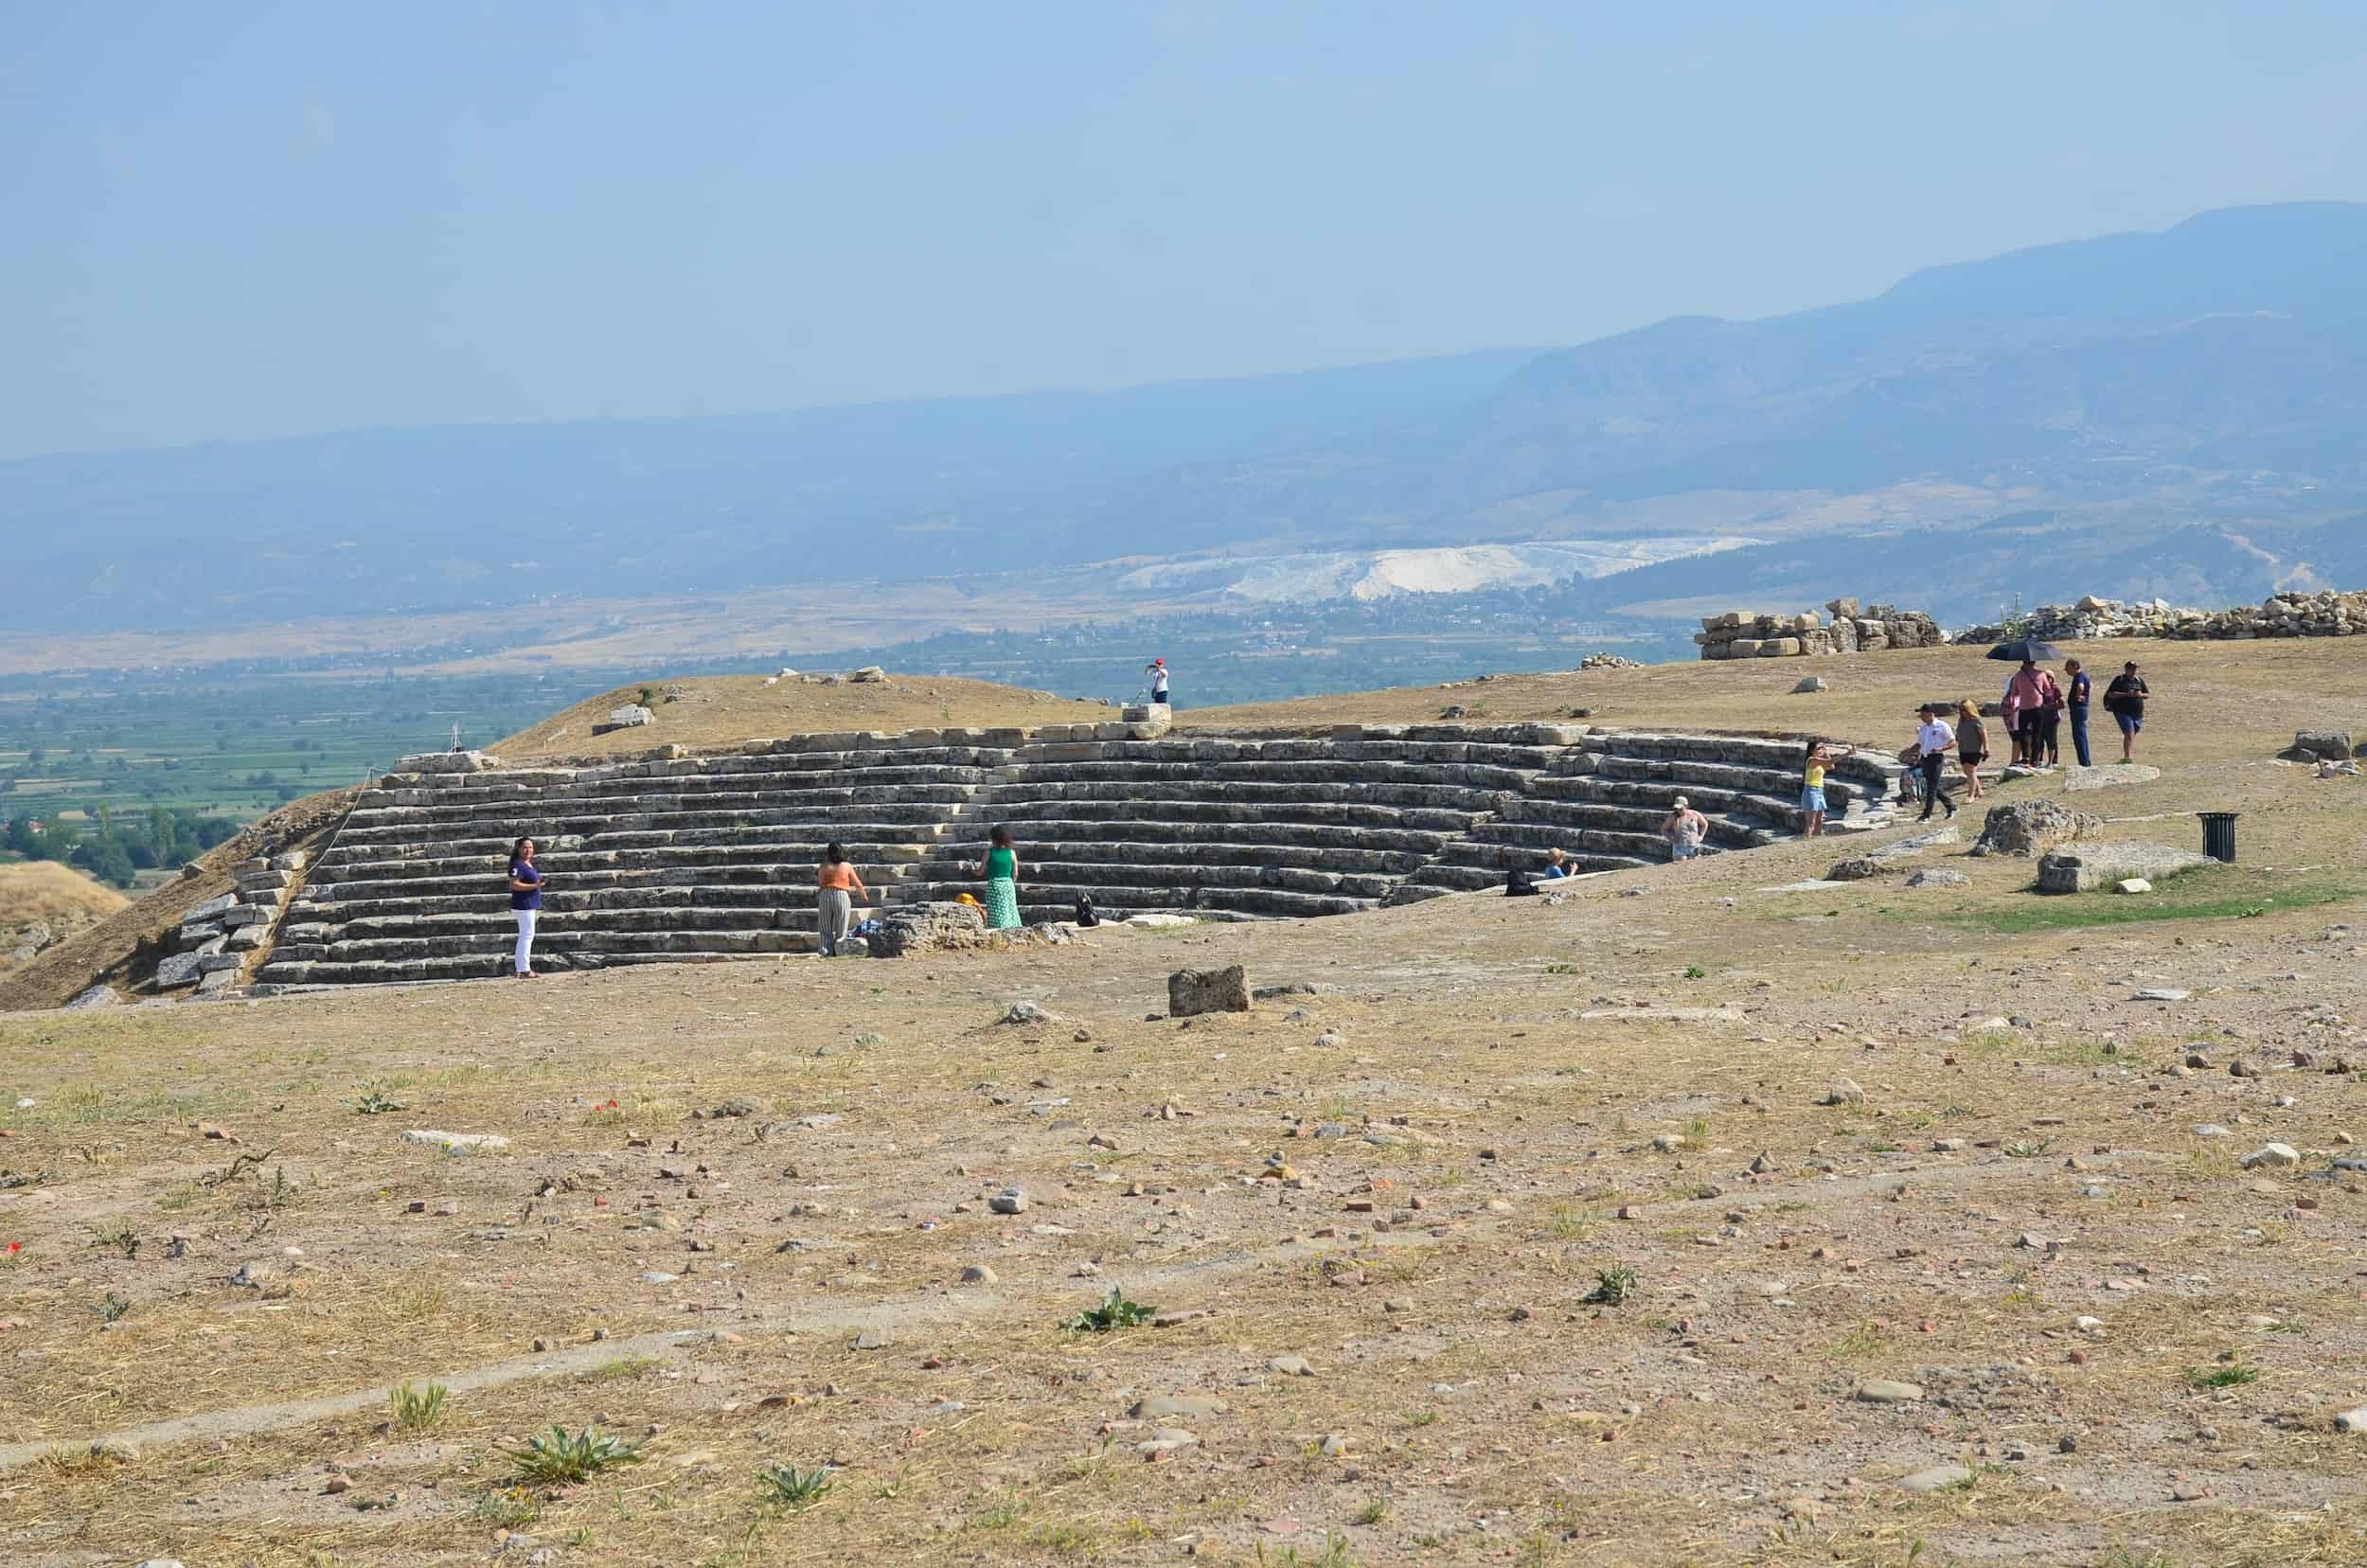 View of the travertine terraces of Pamukkale from the West Theatre